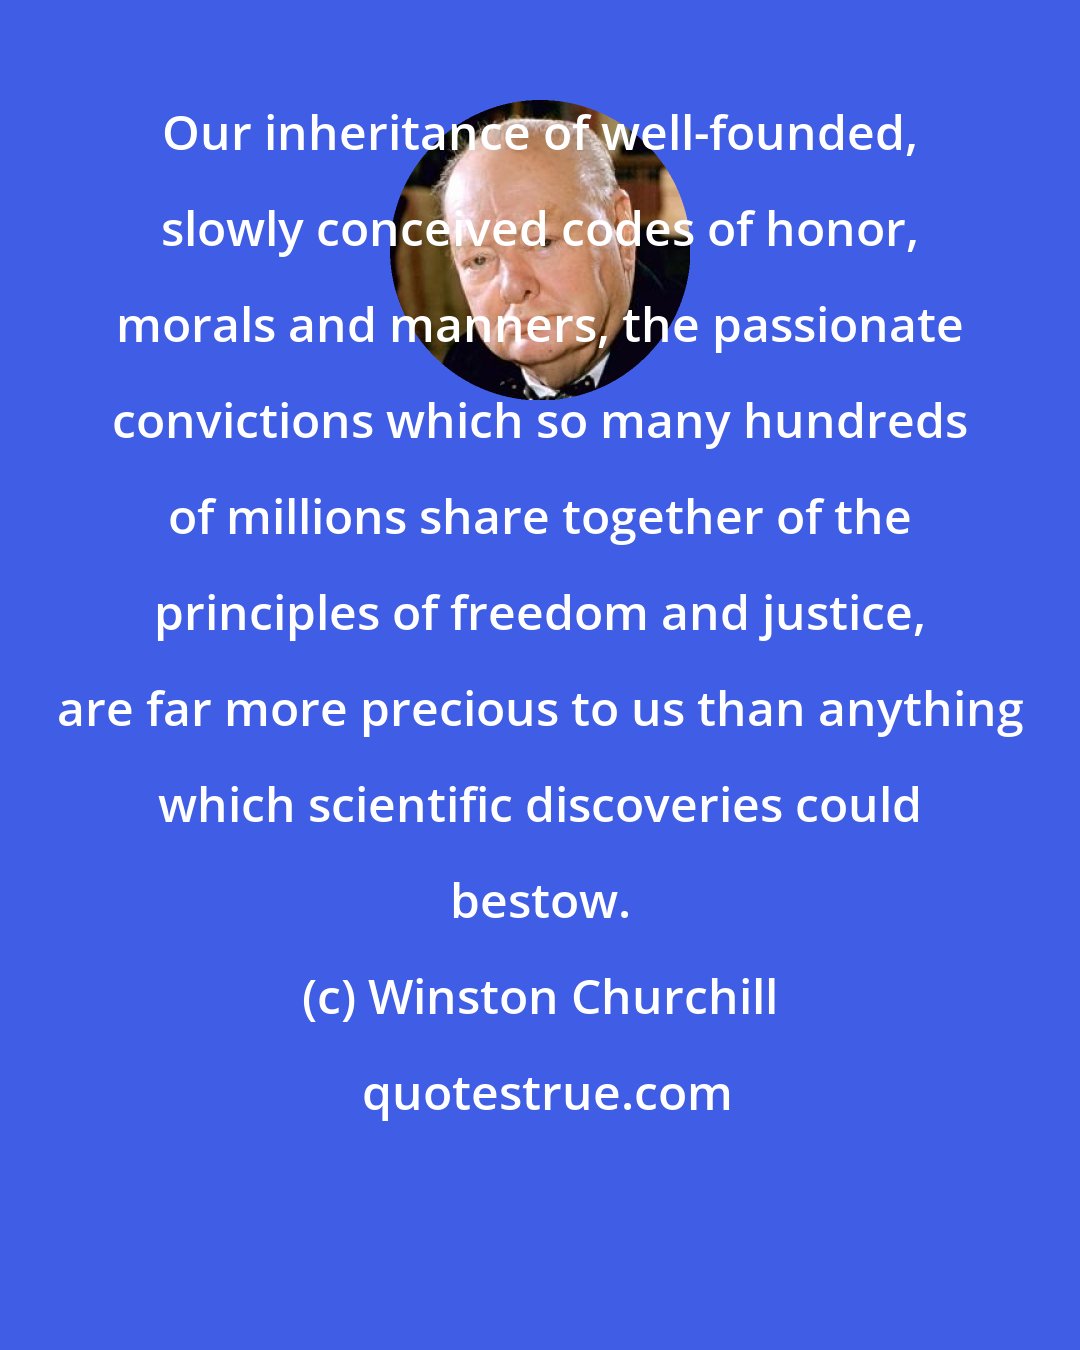 Winston Churchill: Our inheritance of well-founded, slowly conceived codes of honor, morals and manners, the passionate convictions which so many hundreds of millions share together of the principles of freedom and justice, are far more precious to us than anything which scientific discoveries could bestow.